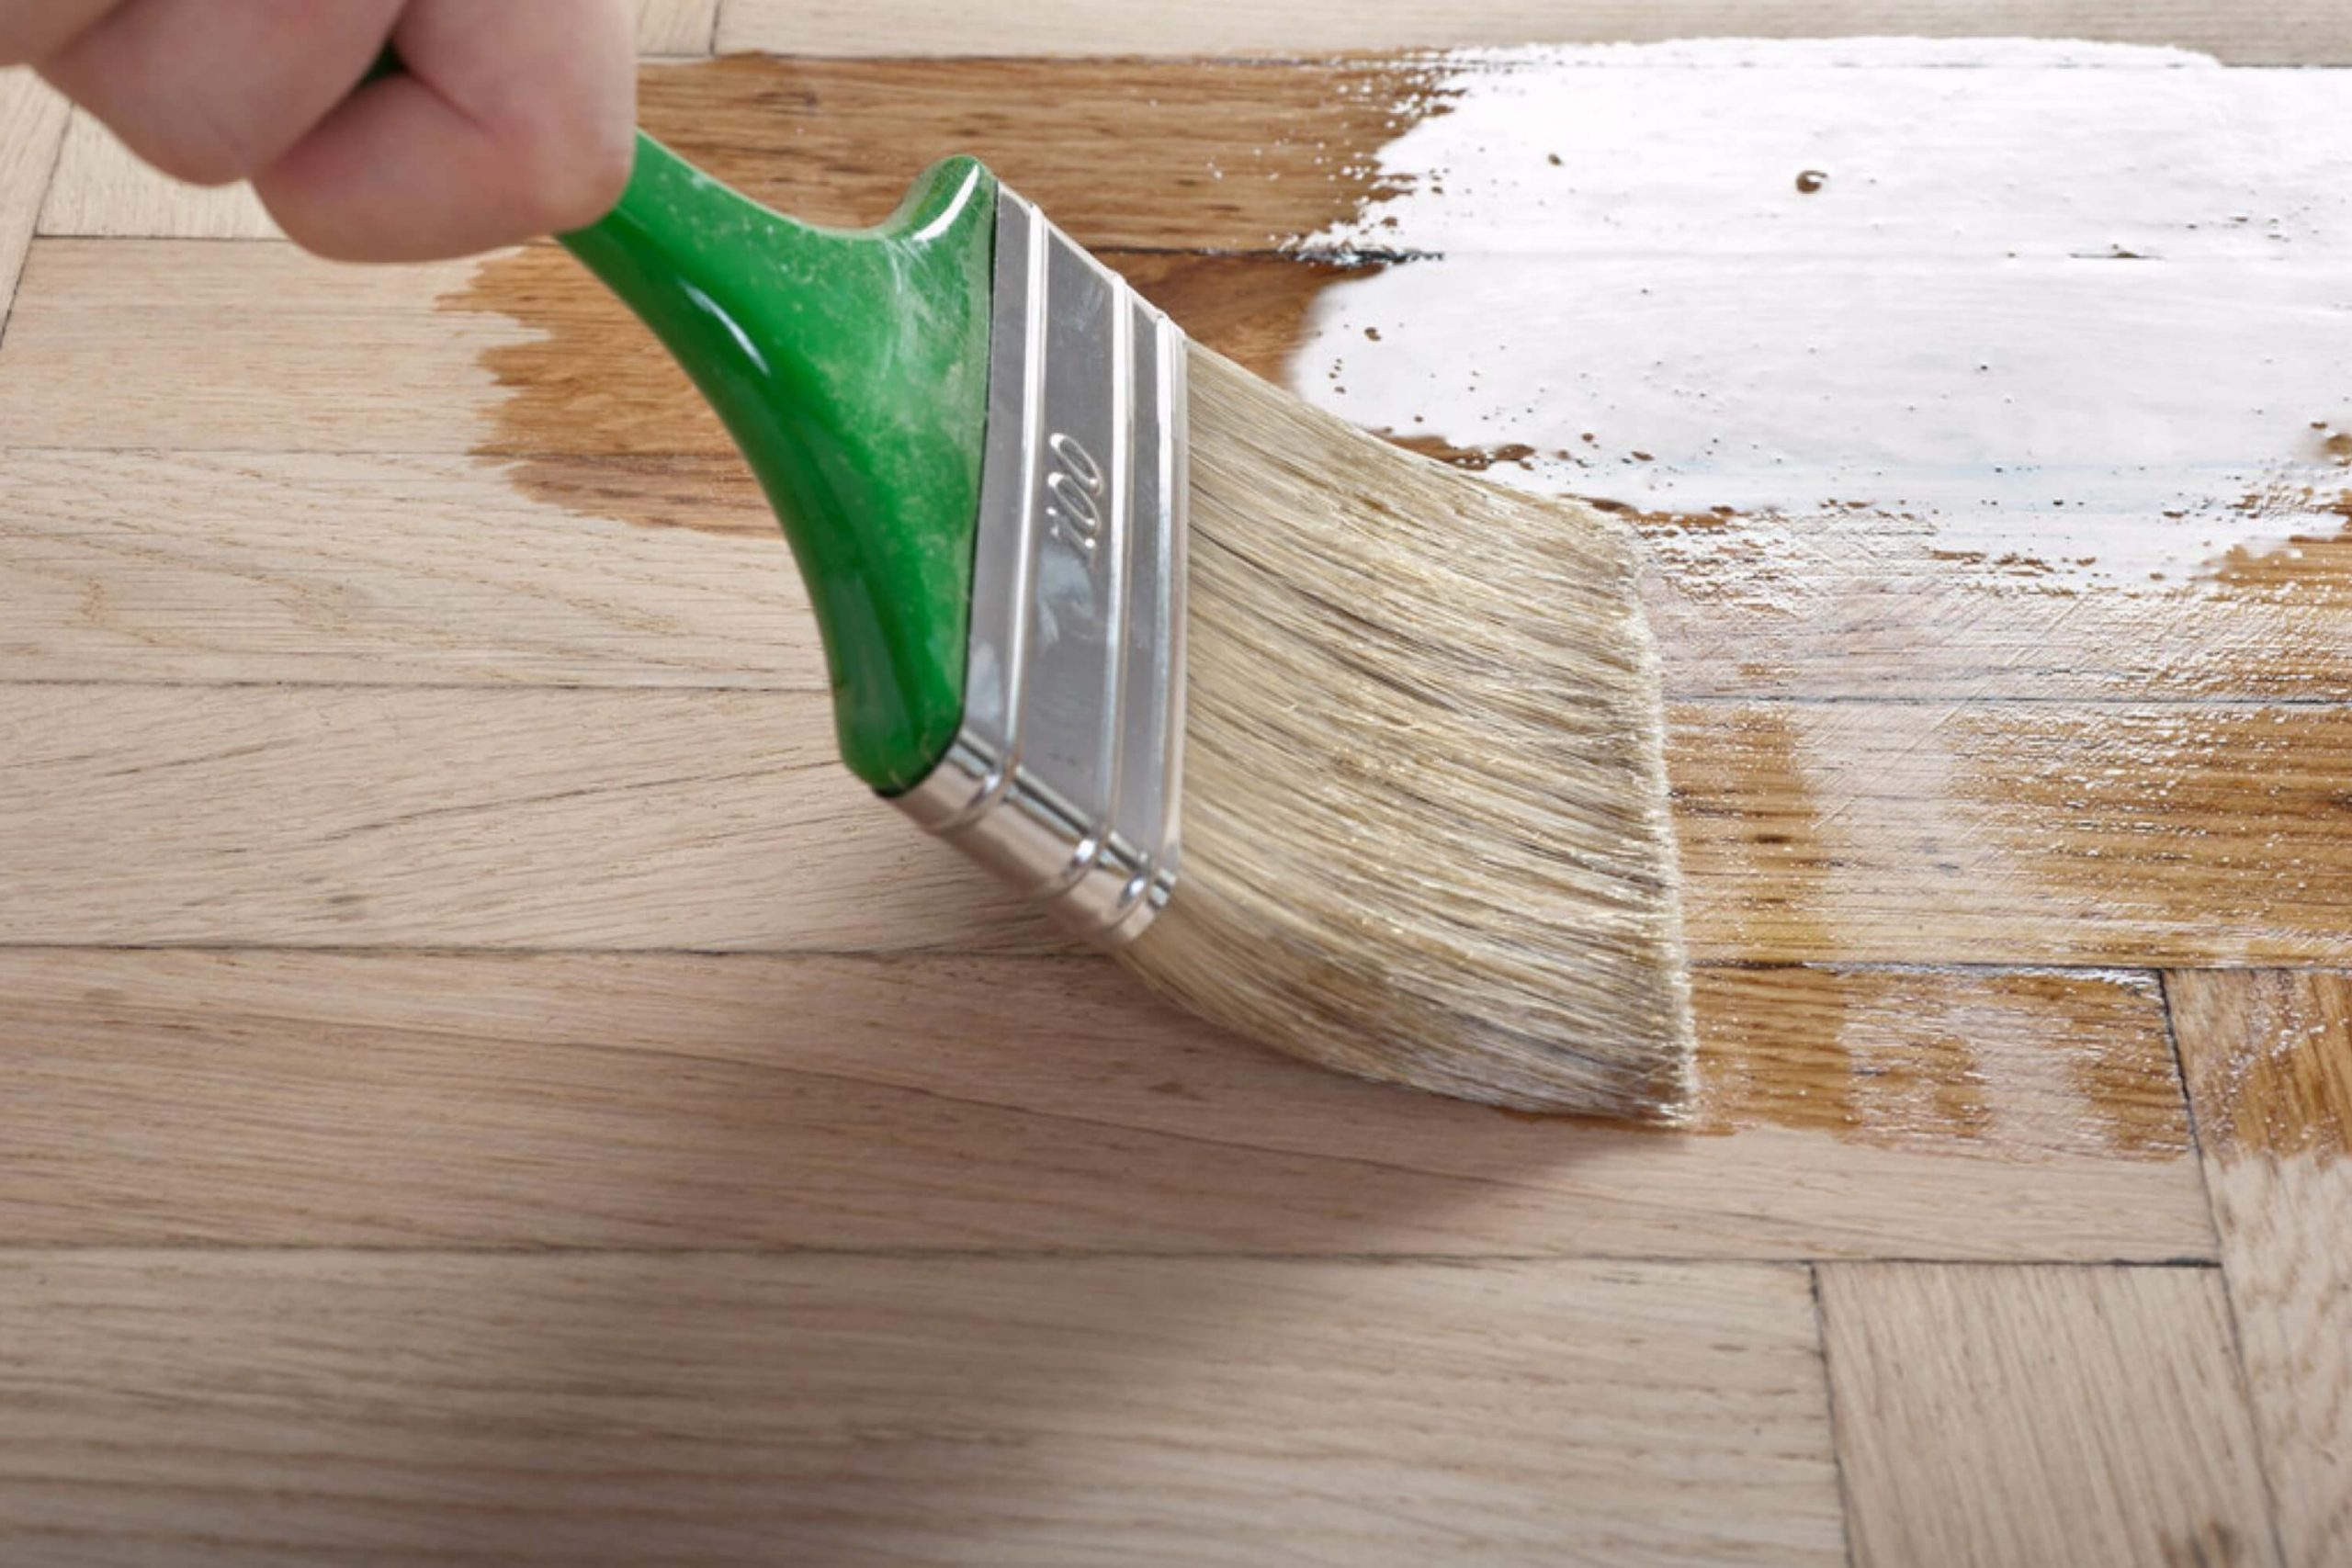 Removing Different Types Of Paint From Vinyl Flooring